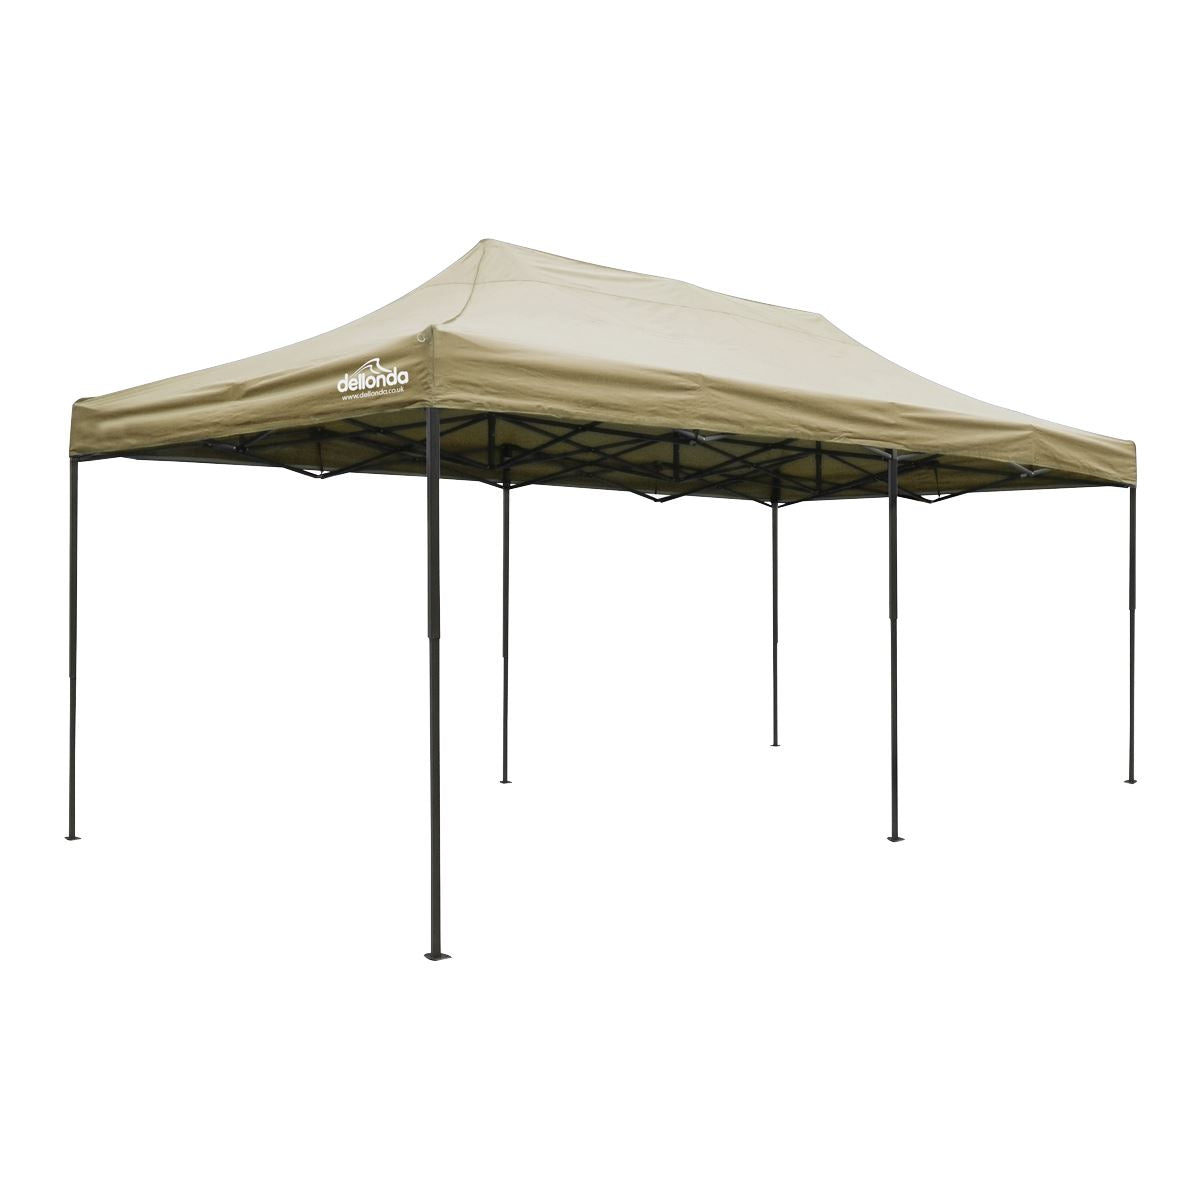 Dellonda Premium 3x6m Pop-Up Gazebo, Heavy Duty, PVC Coated, Water Resistant Fabric Supplied with Carry Bag, Rope, Stakes & Weight Bags - Beige Canopy